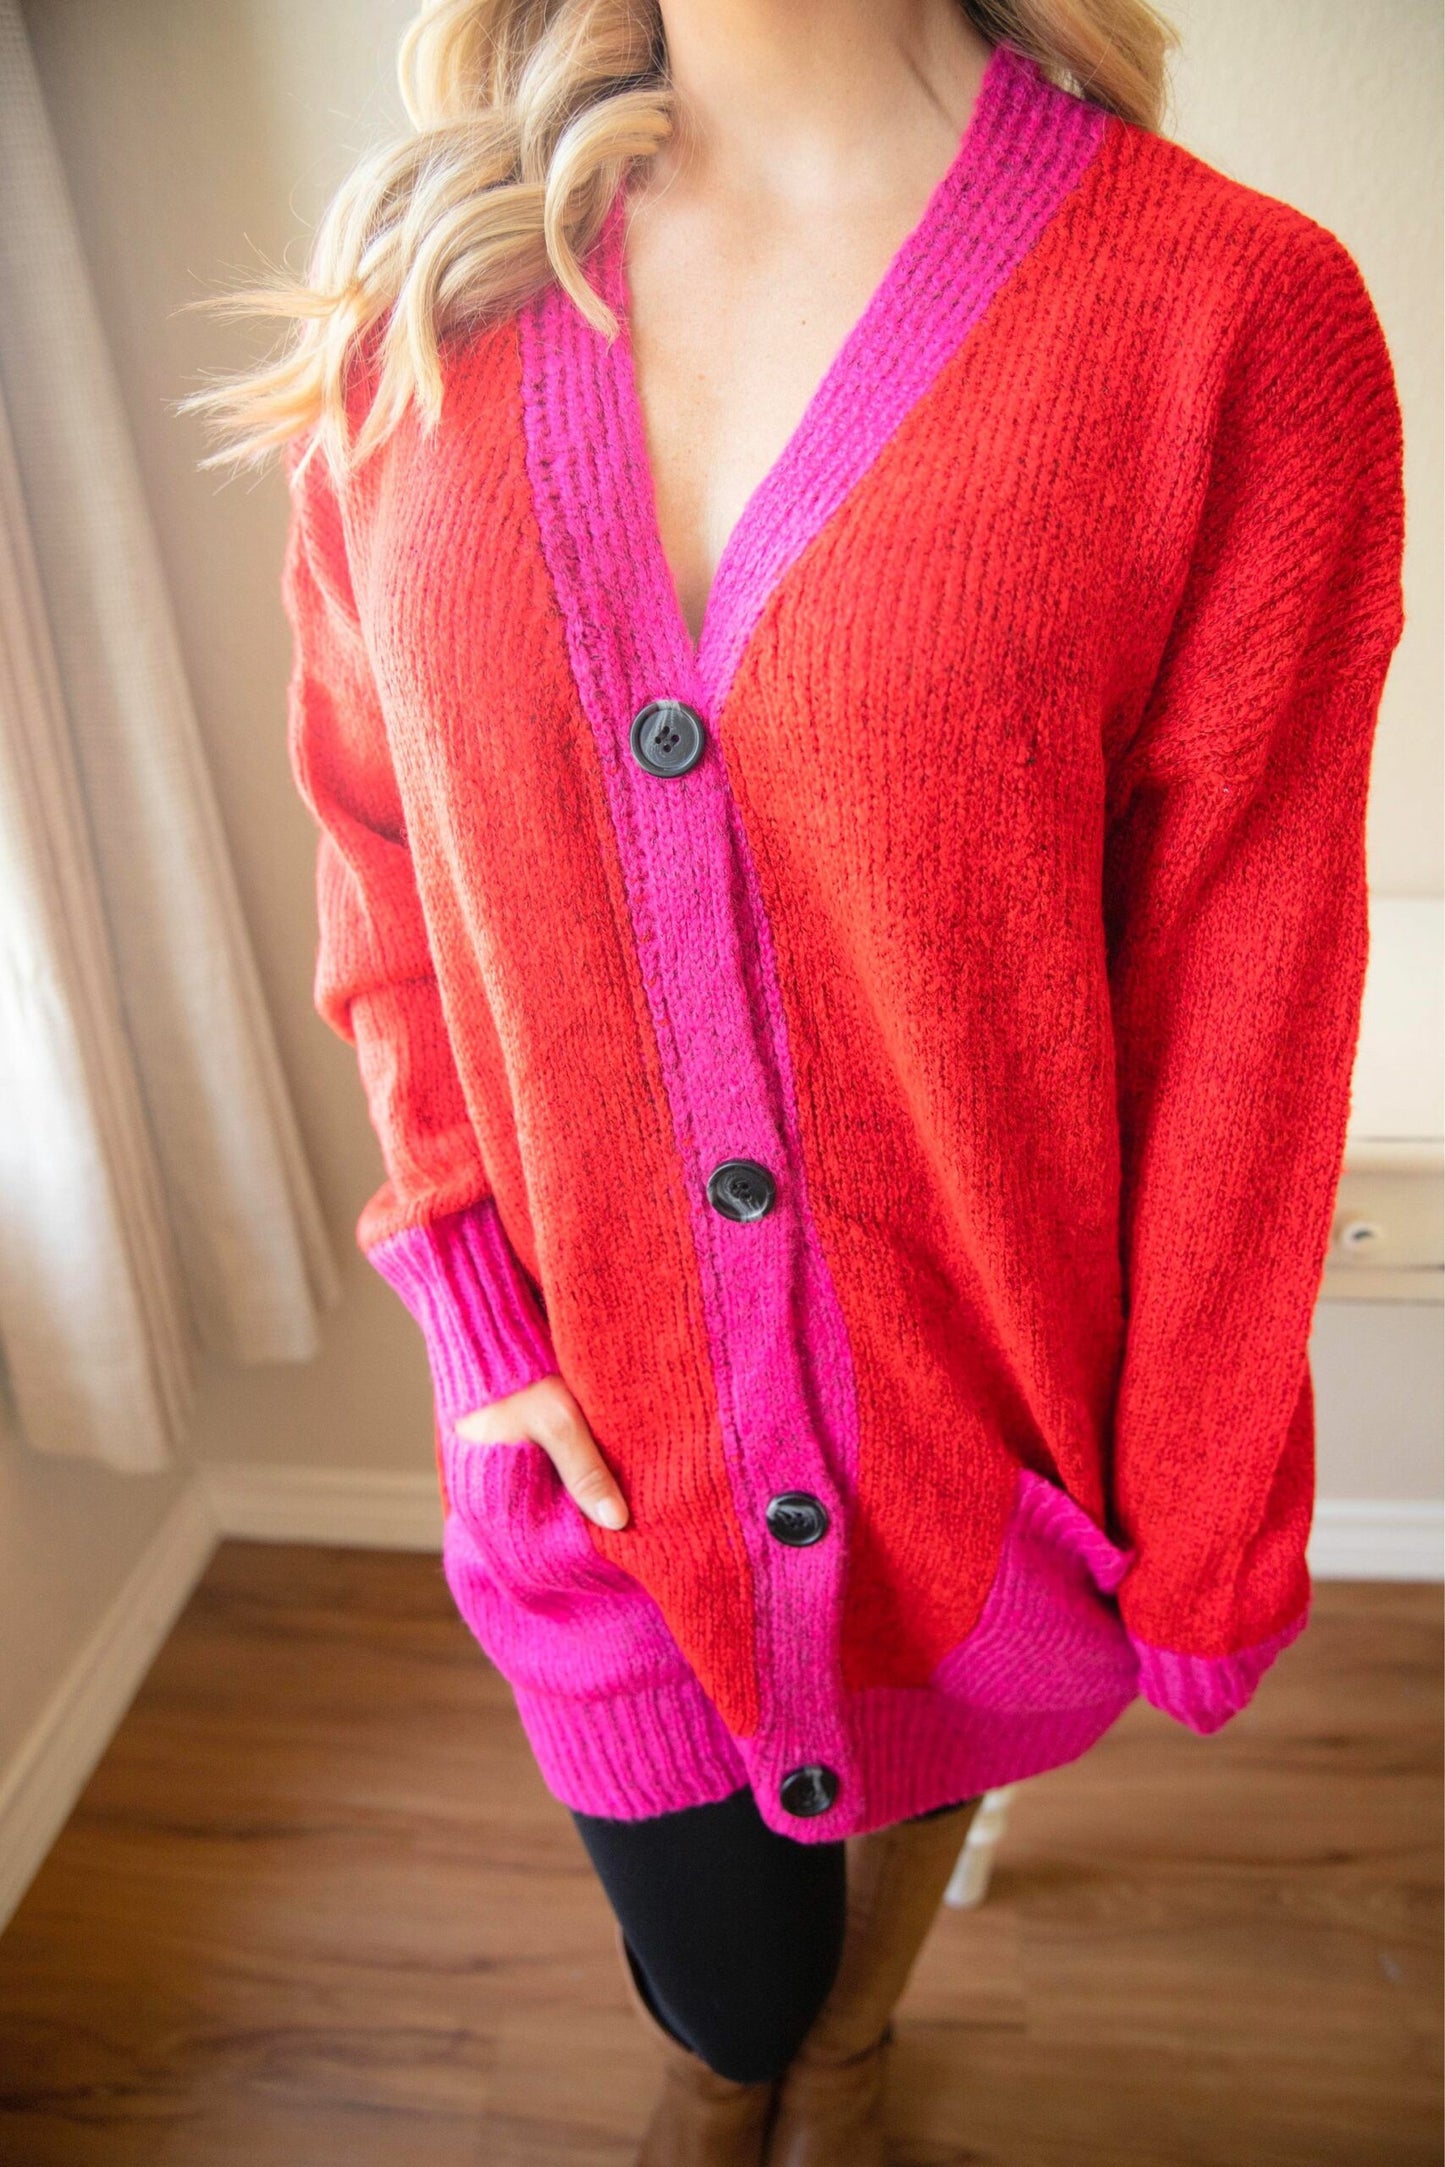 Catch Your Eye Cardigan - Pink/Red